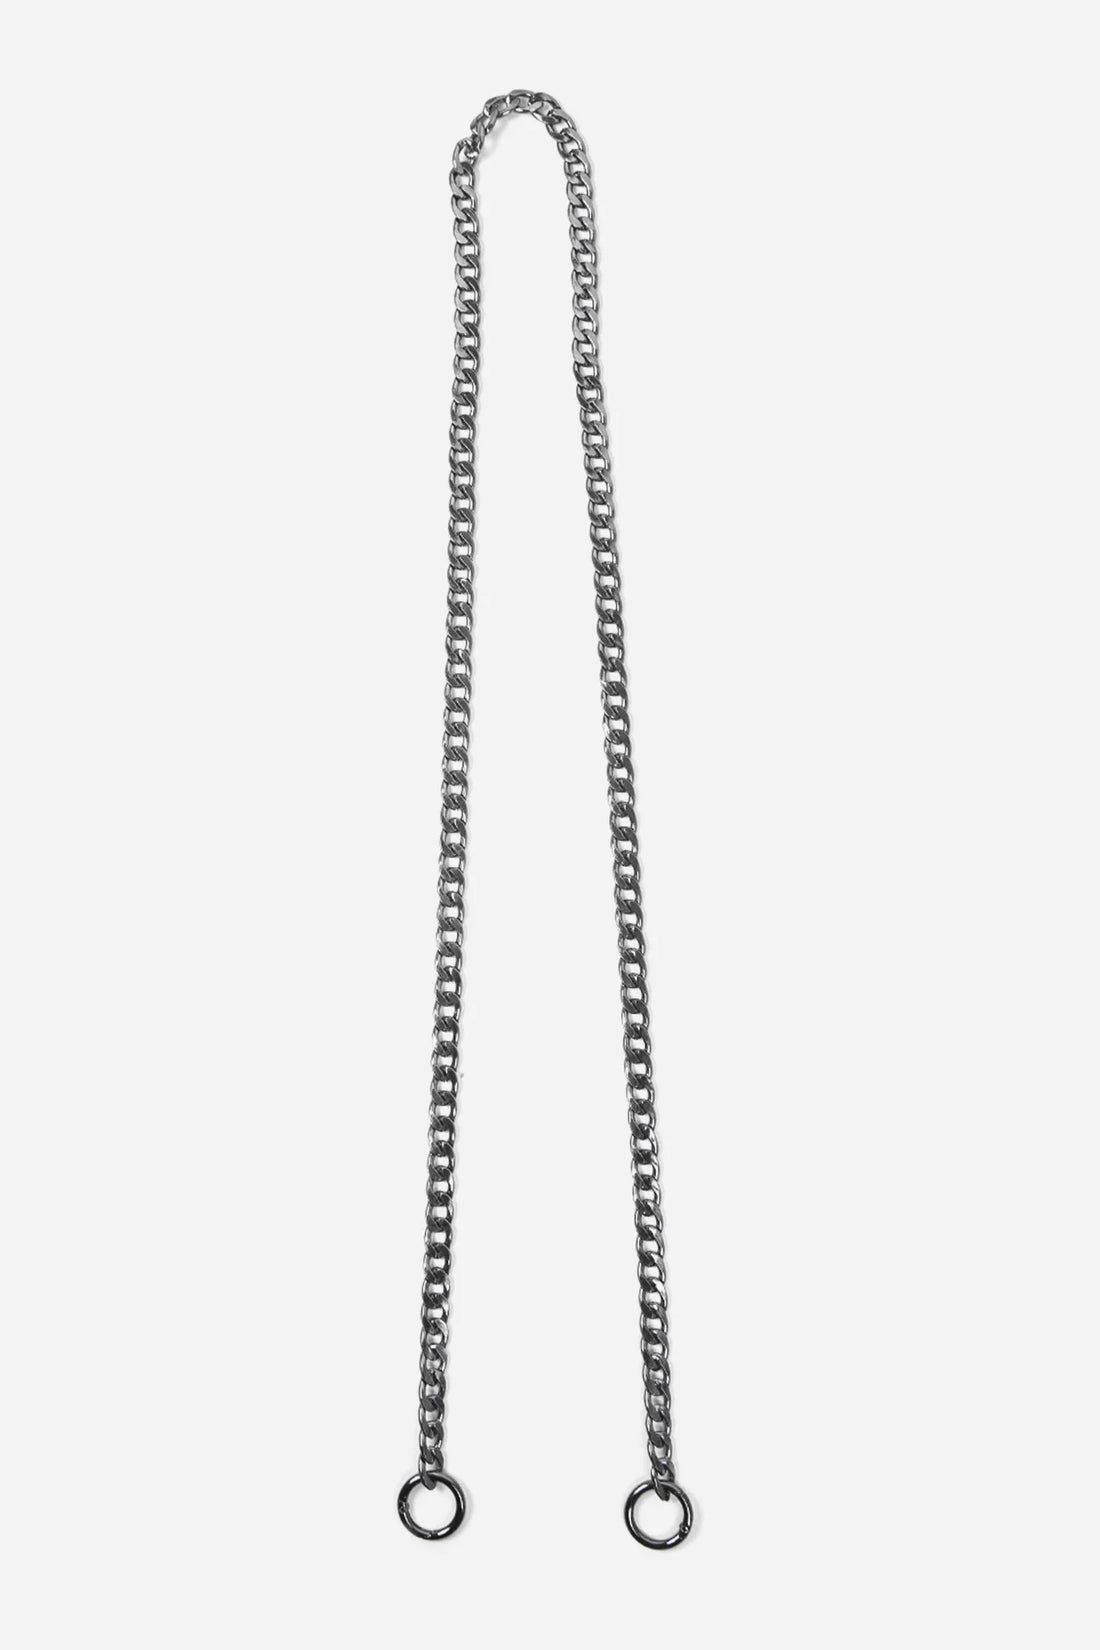 CUBAN STYLE CHAIN LINK BAG STRAP | PEWTER